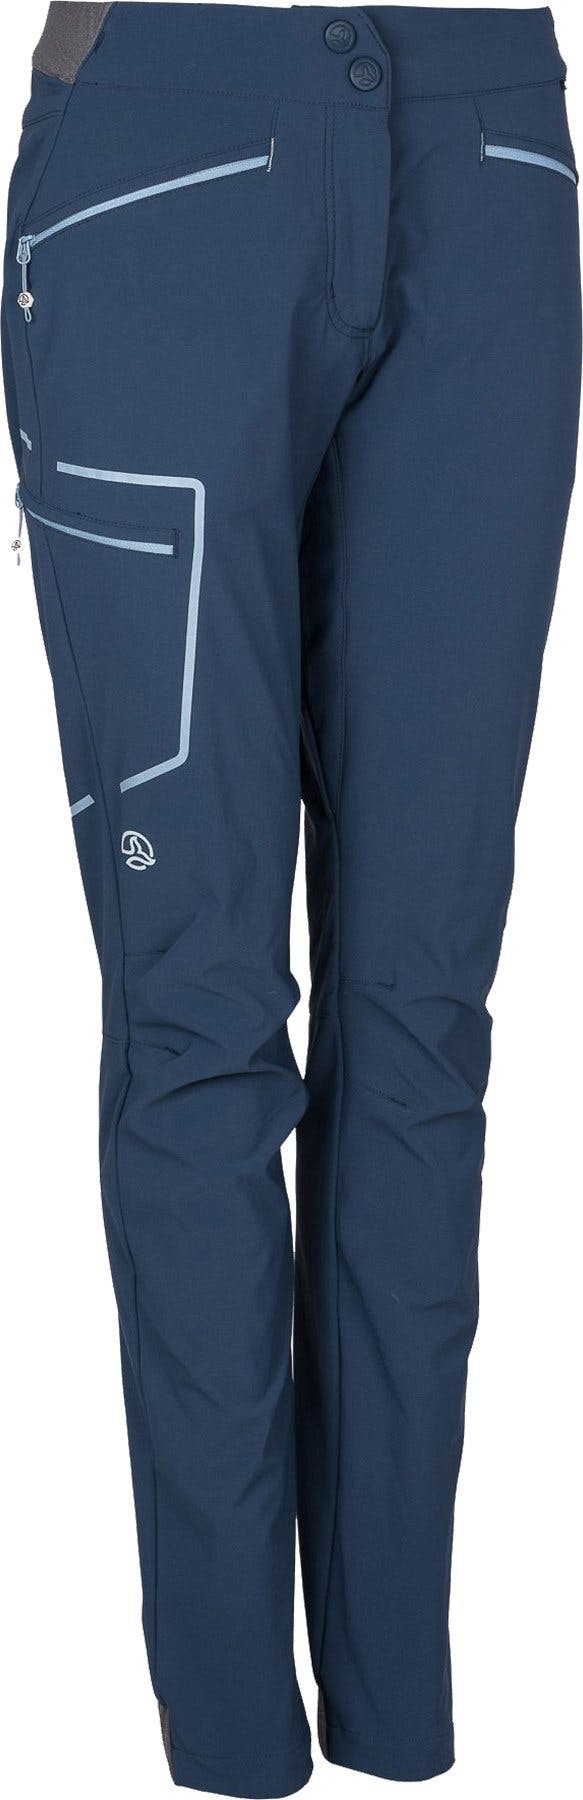 Product image for Barsona Warm PT Trousers - Women's